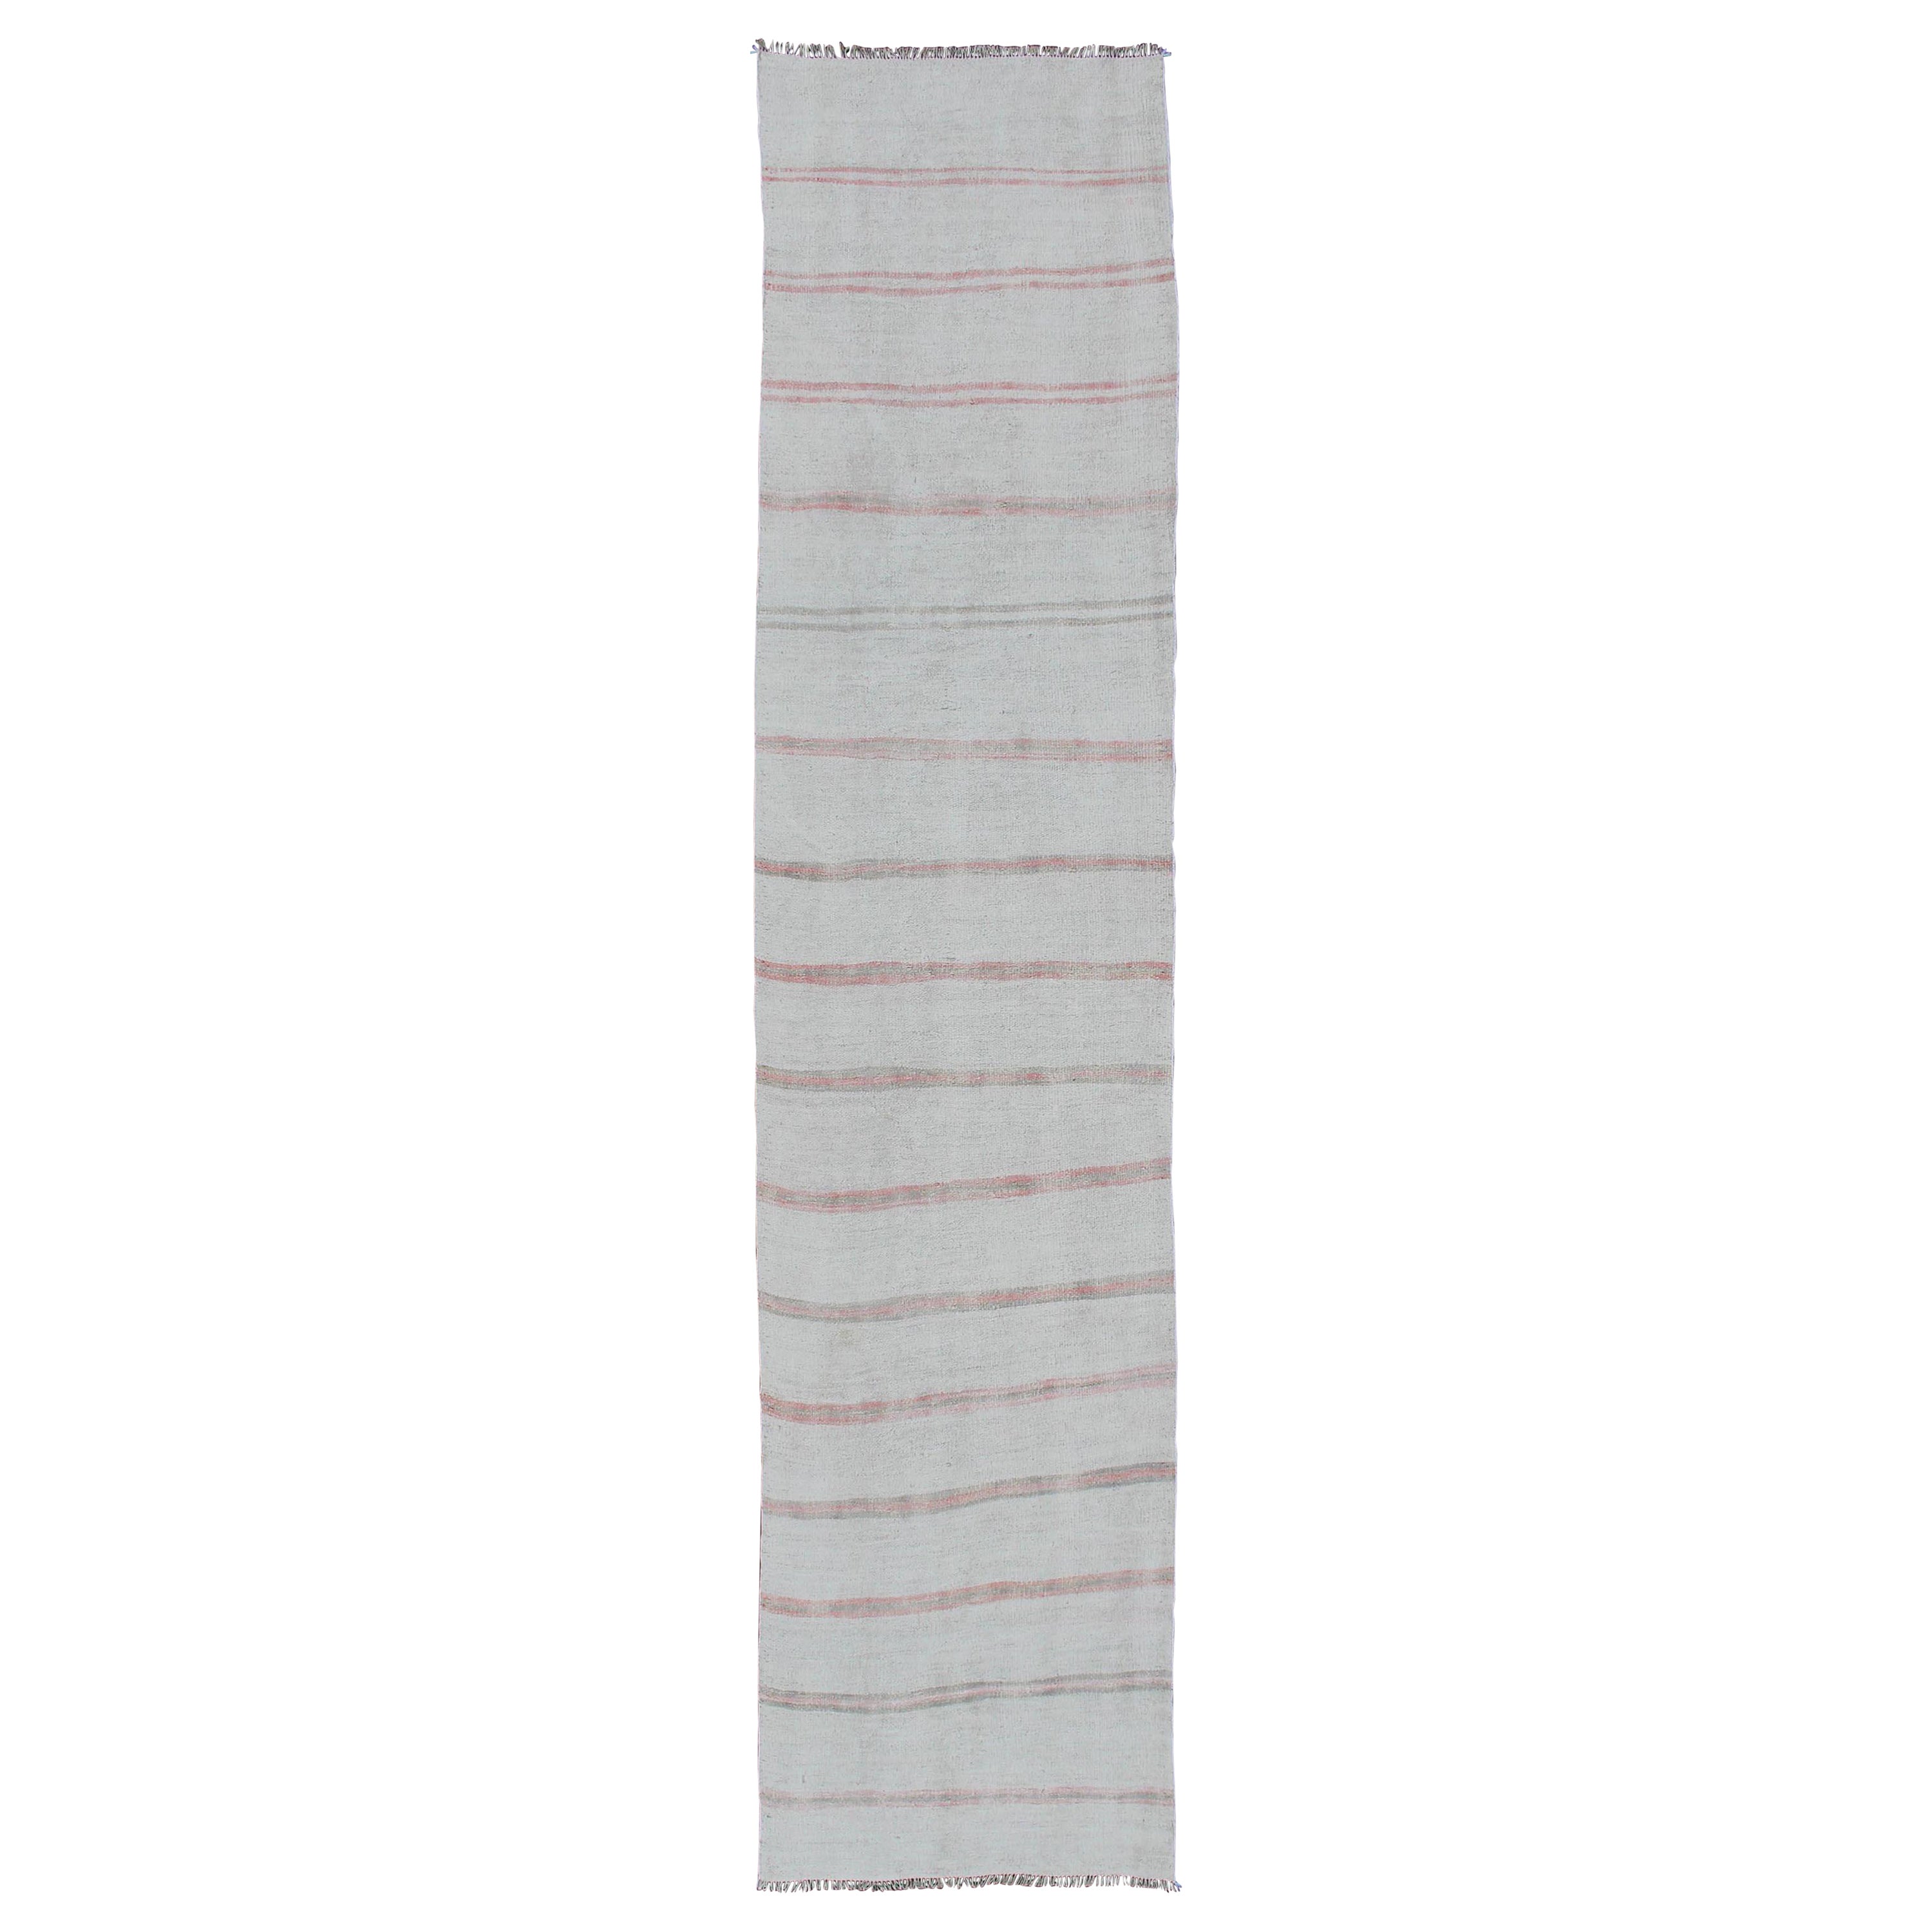 Striped Turkish Vintage Kilim Flat-Weave Rug in Shades of Soft Red and Cream